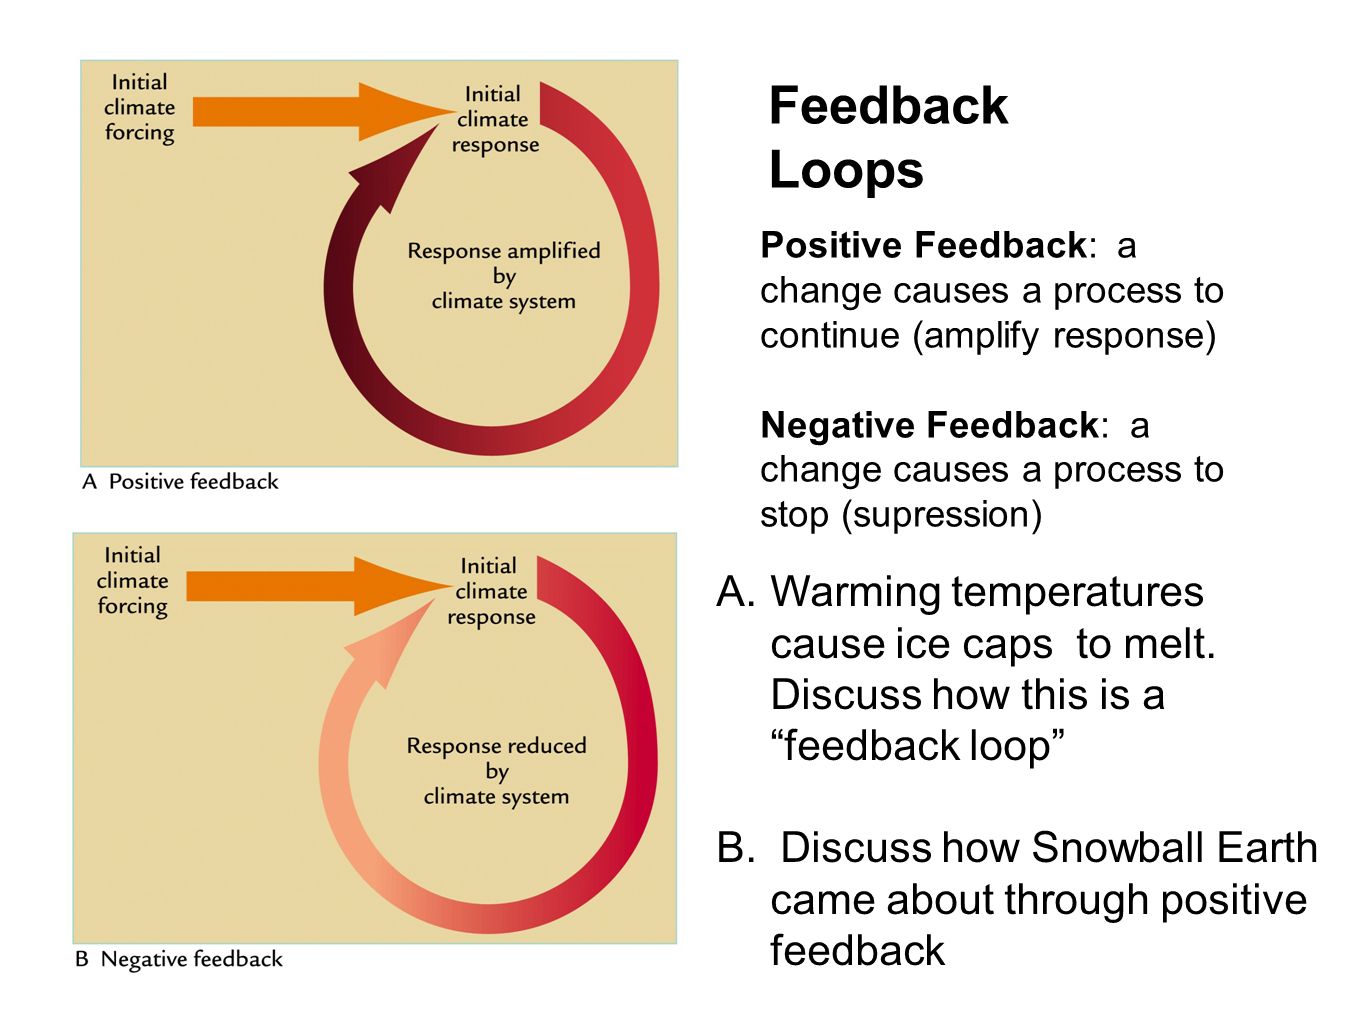 Feedback Loops Positive Feedback: a change causes a process to continue (amplify response) Negative Feedback: a change causes a process to stop (supression) A.Warming temperatures cause ice caps to melt.